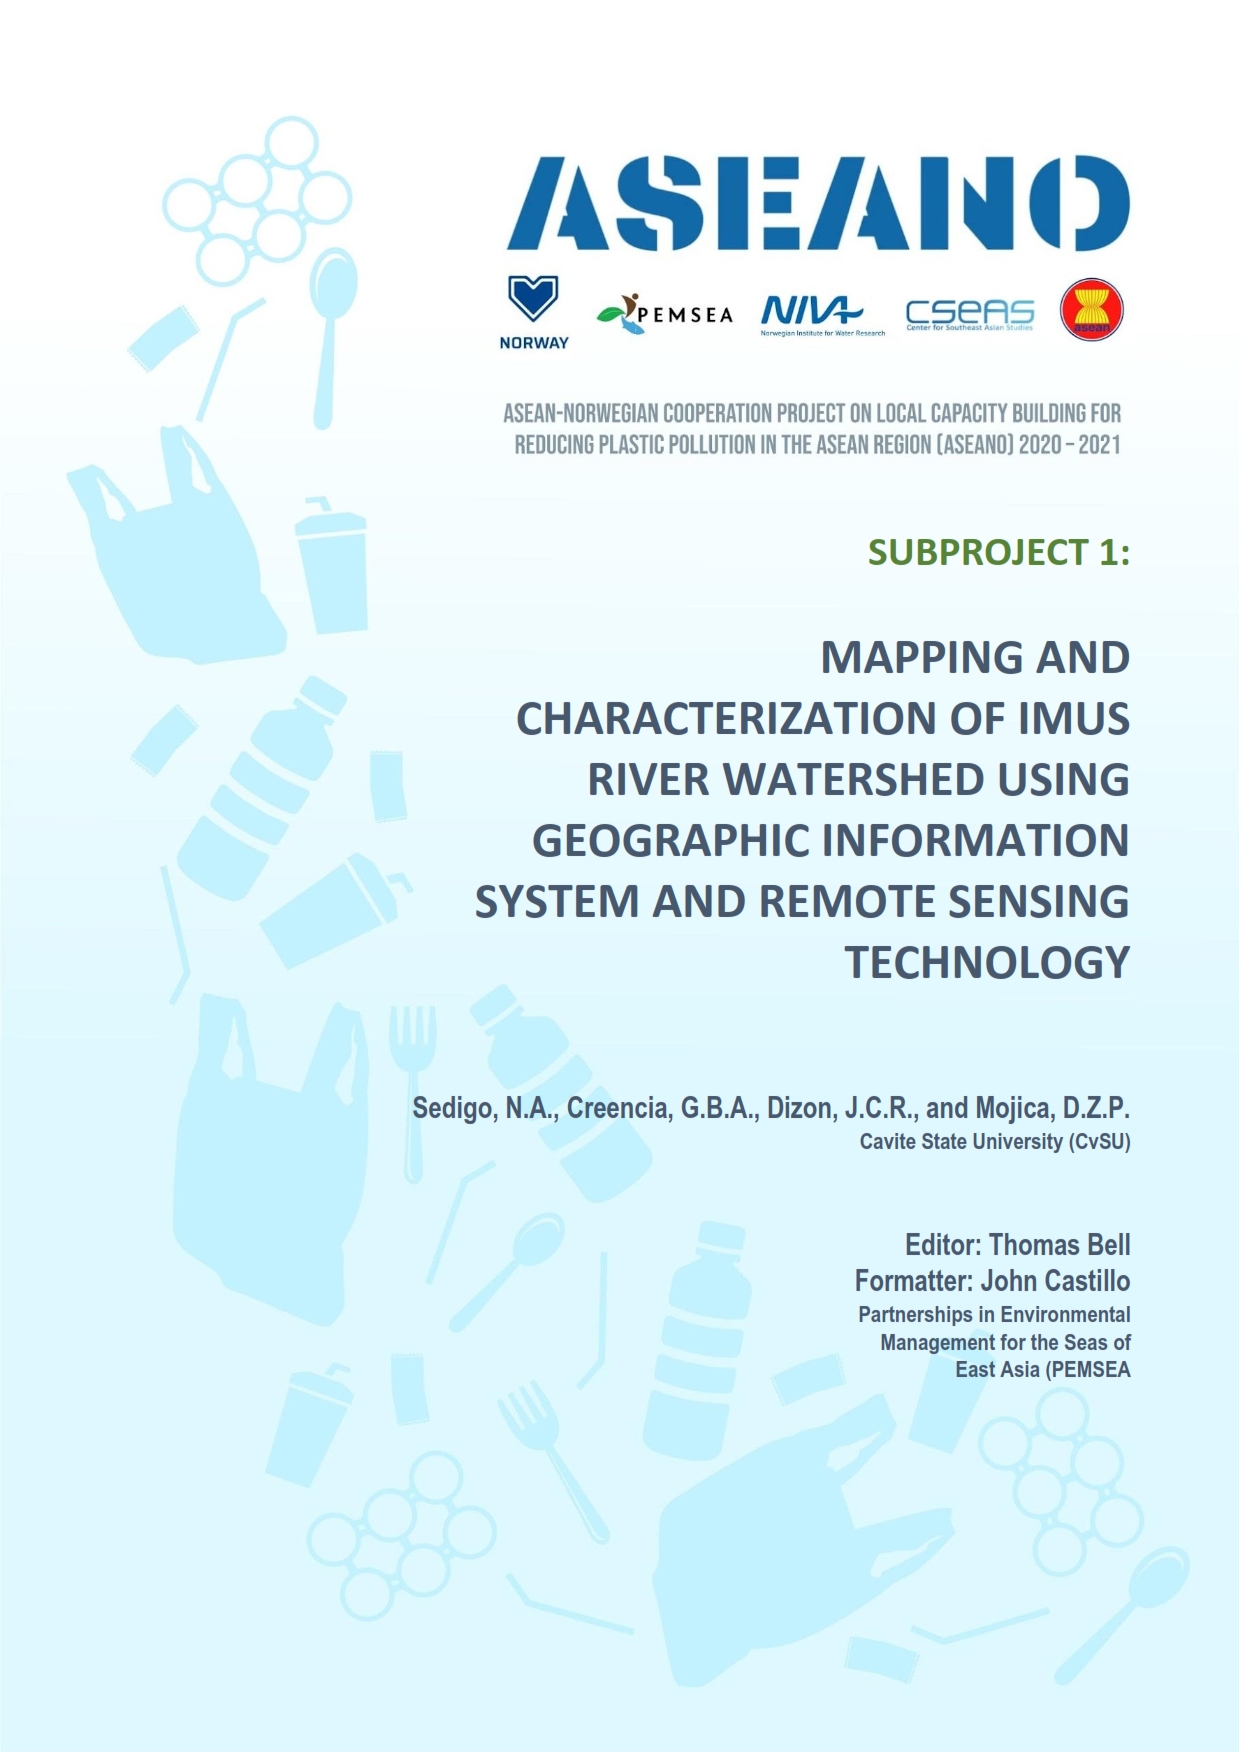 ASEANO Project Report: Mapping and Characterization of the Imus River Watershed